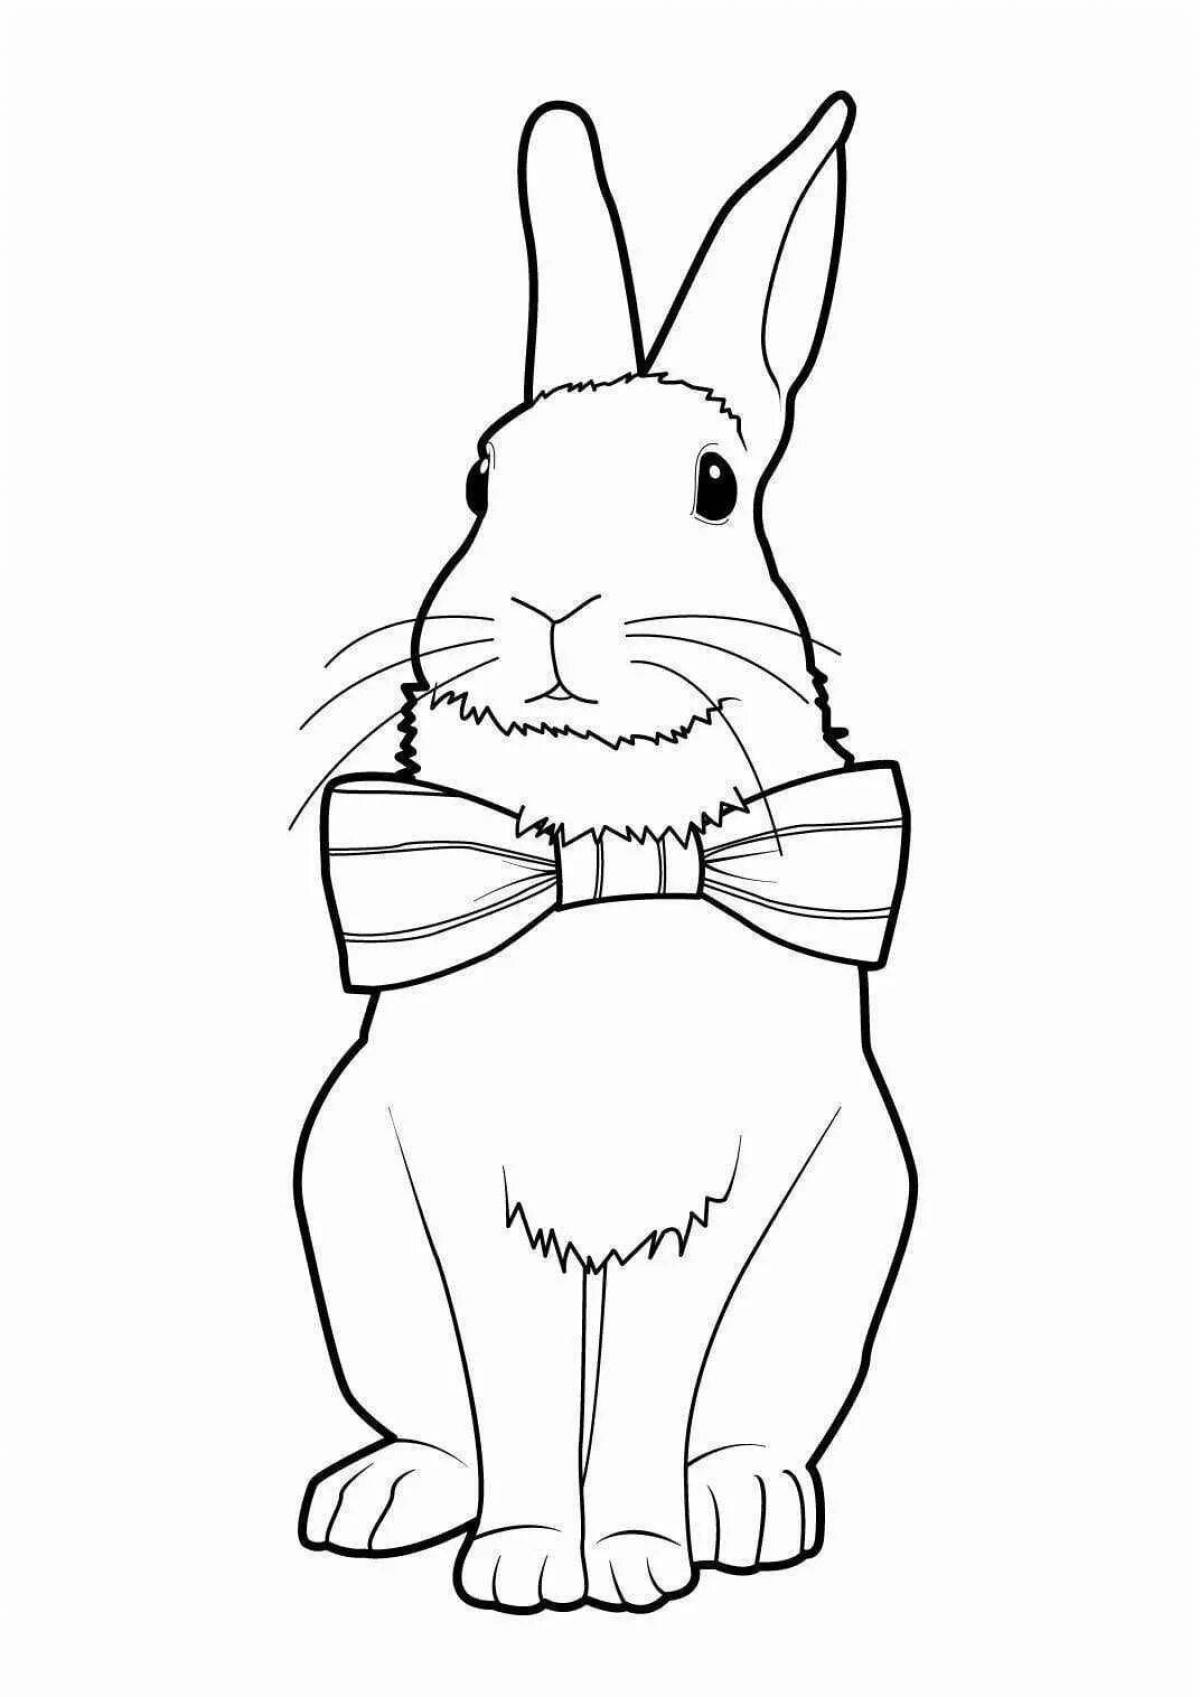 Winking bunny with a bow